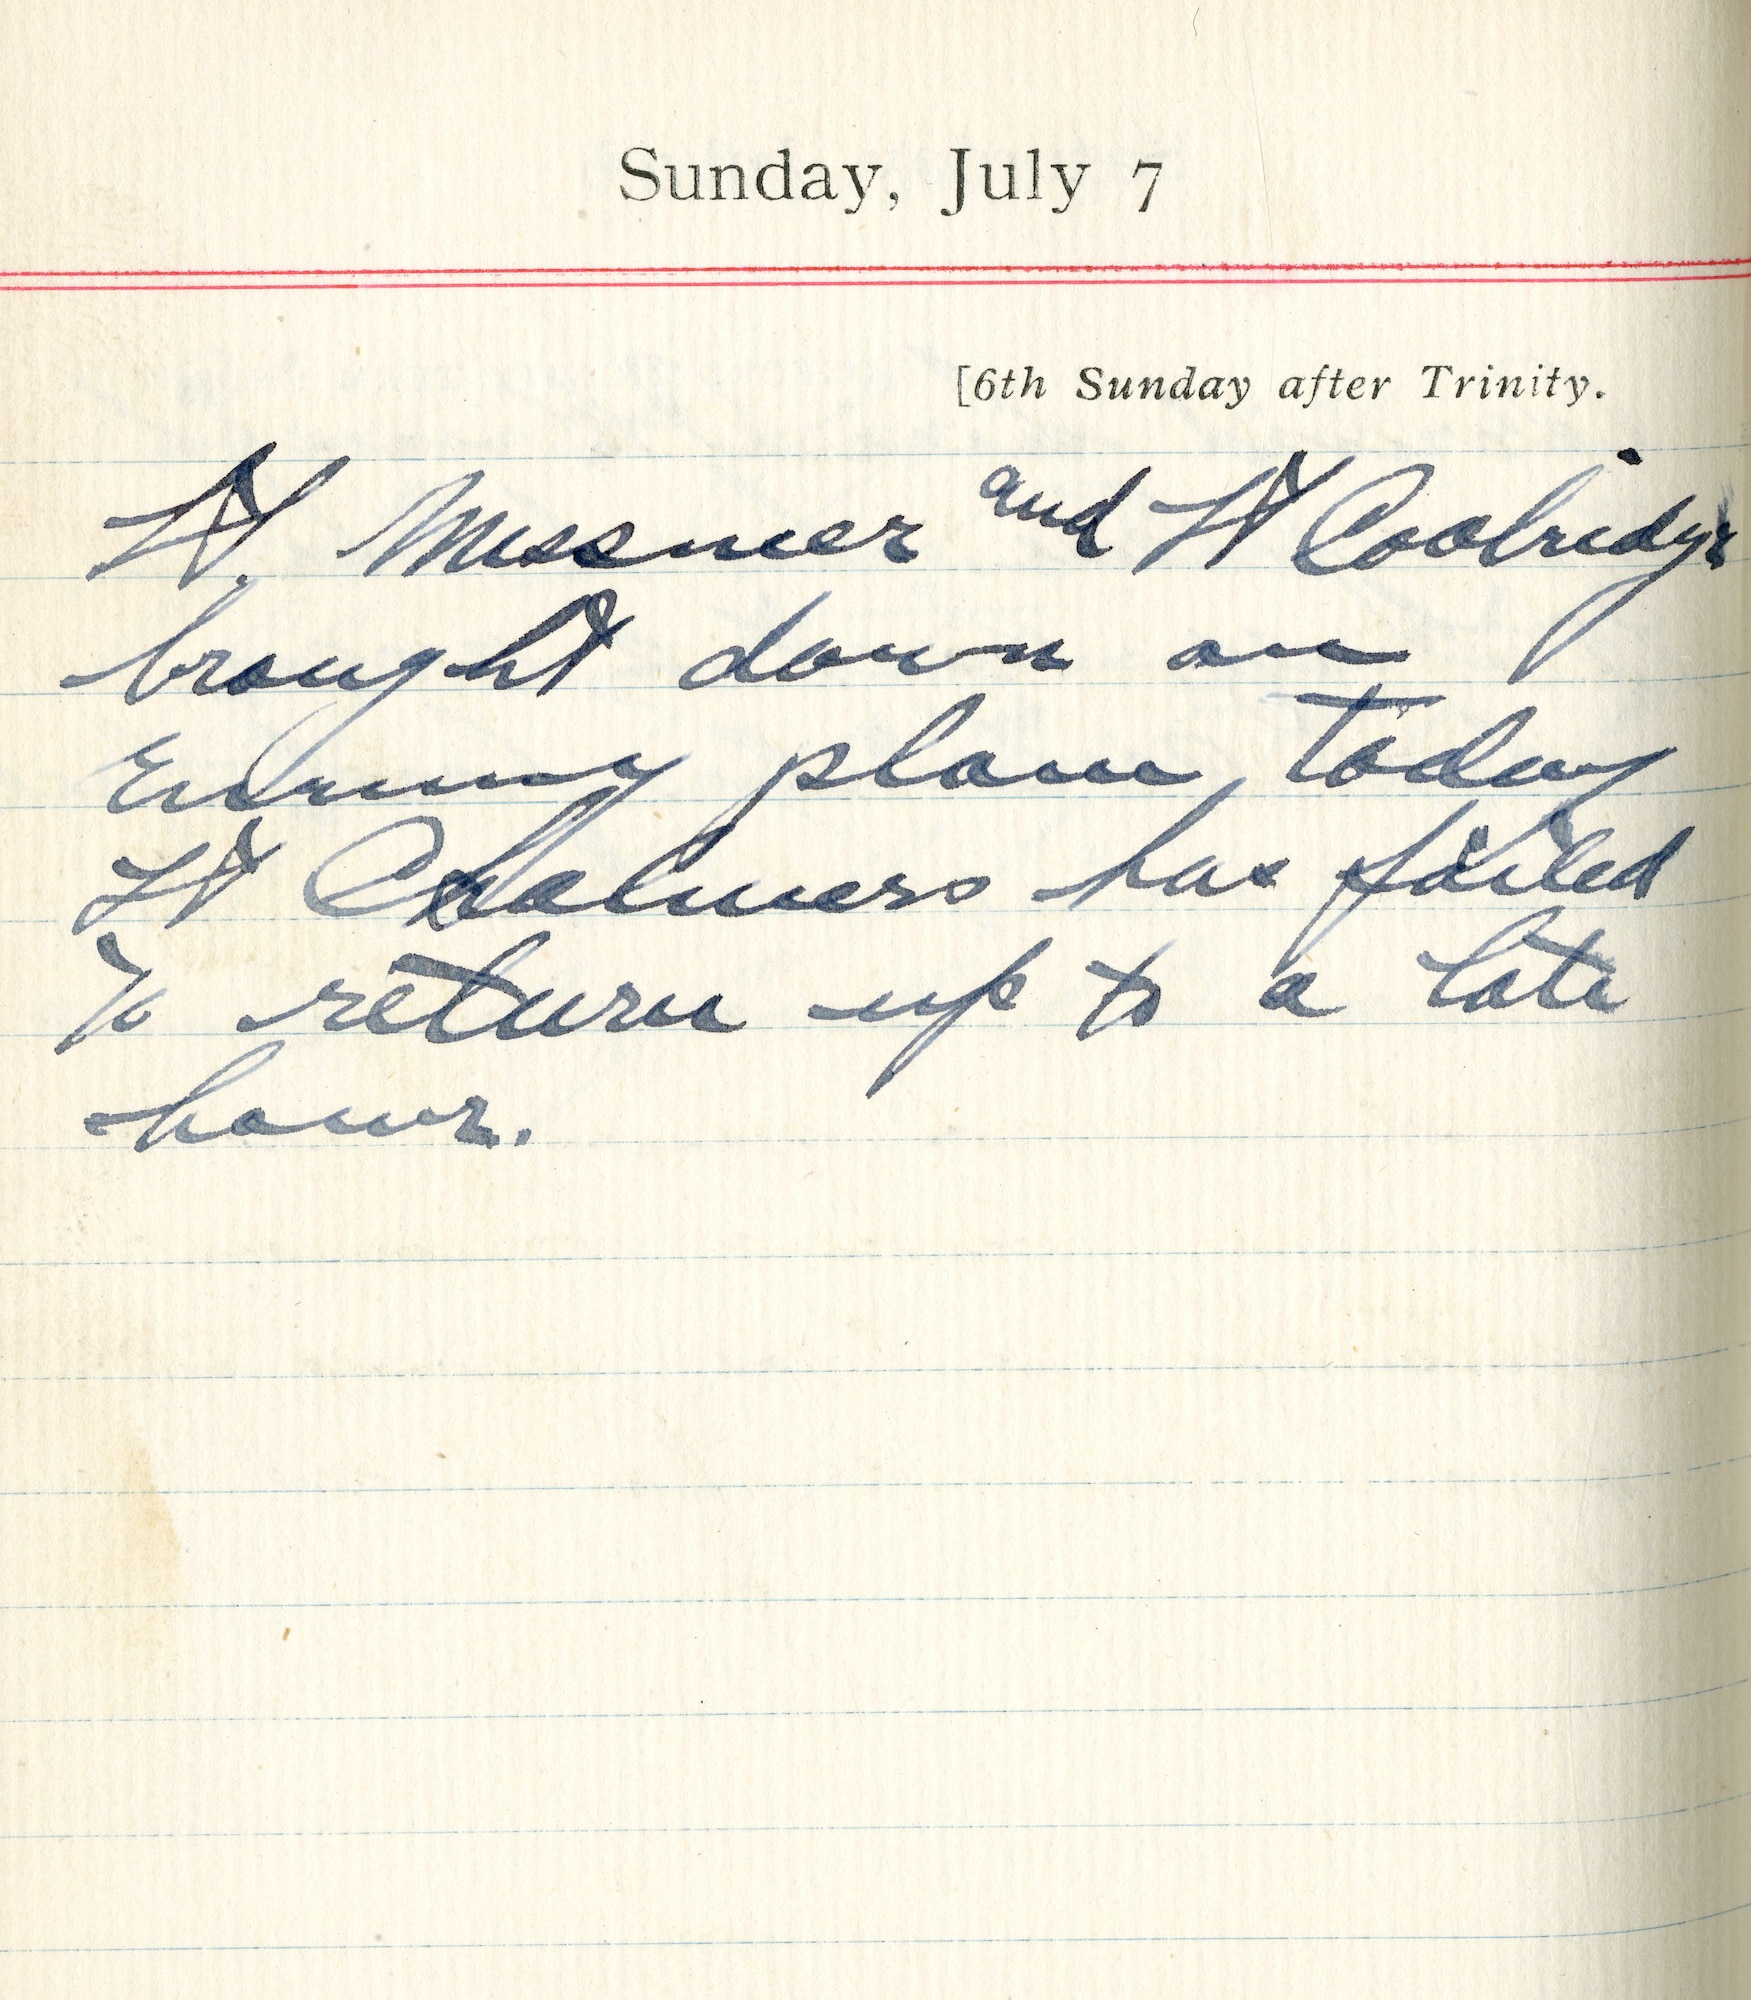 July 7, 1918-Lt. Meissner and Lt. Coolidge brought down an enemy plane today.  Lt. [William W.] Chalmers has failed to return. Up to a late hour.